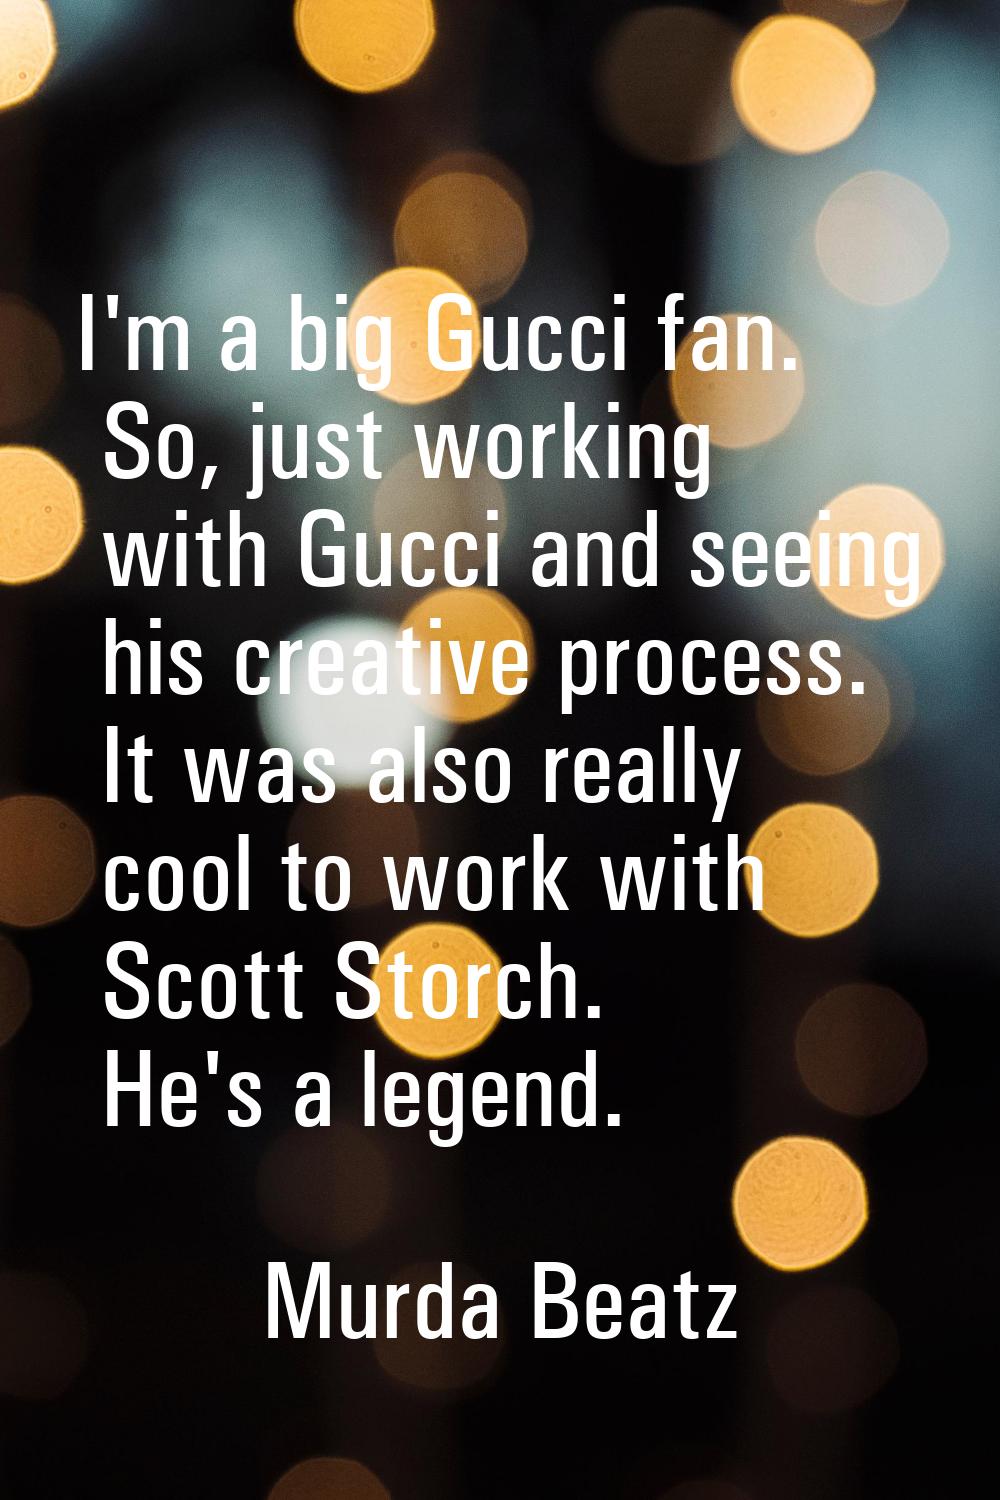 I'm a big Gucci fan. So, just working with Gucci and seeing his creative process. It was also reall